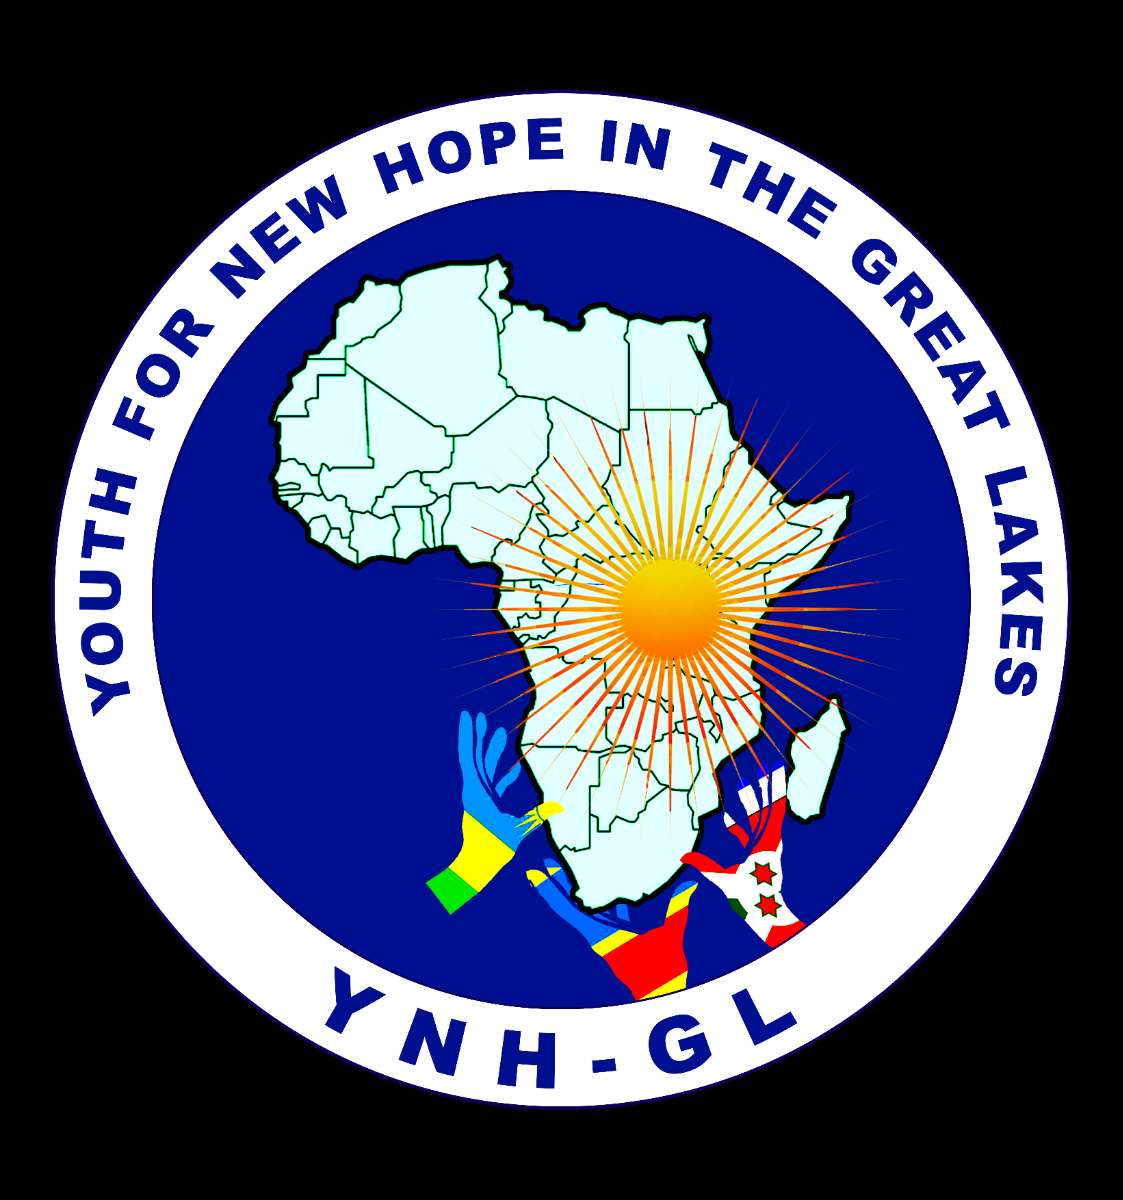 Tout savoir sur le tweeter Space de Youth For New Hope in The Great Lakes